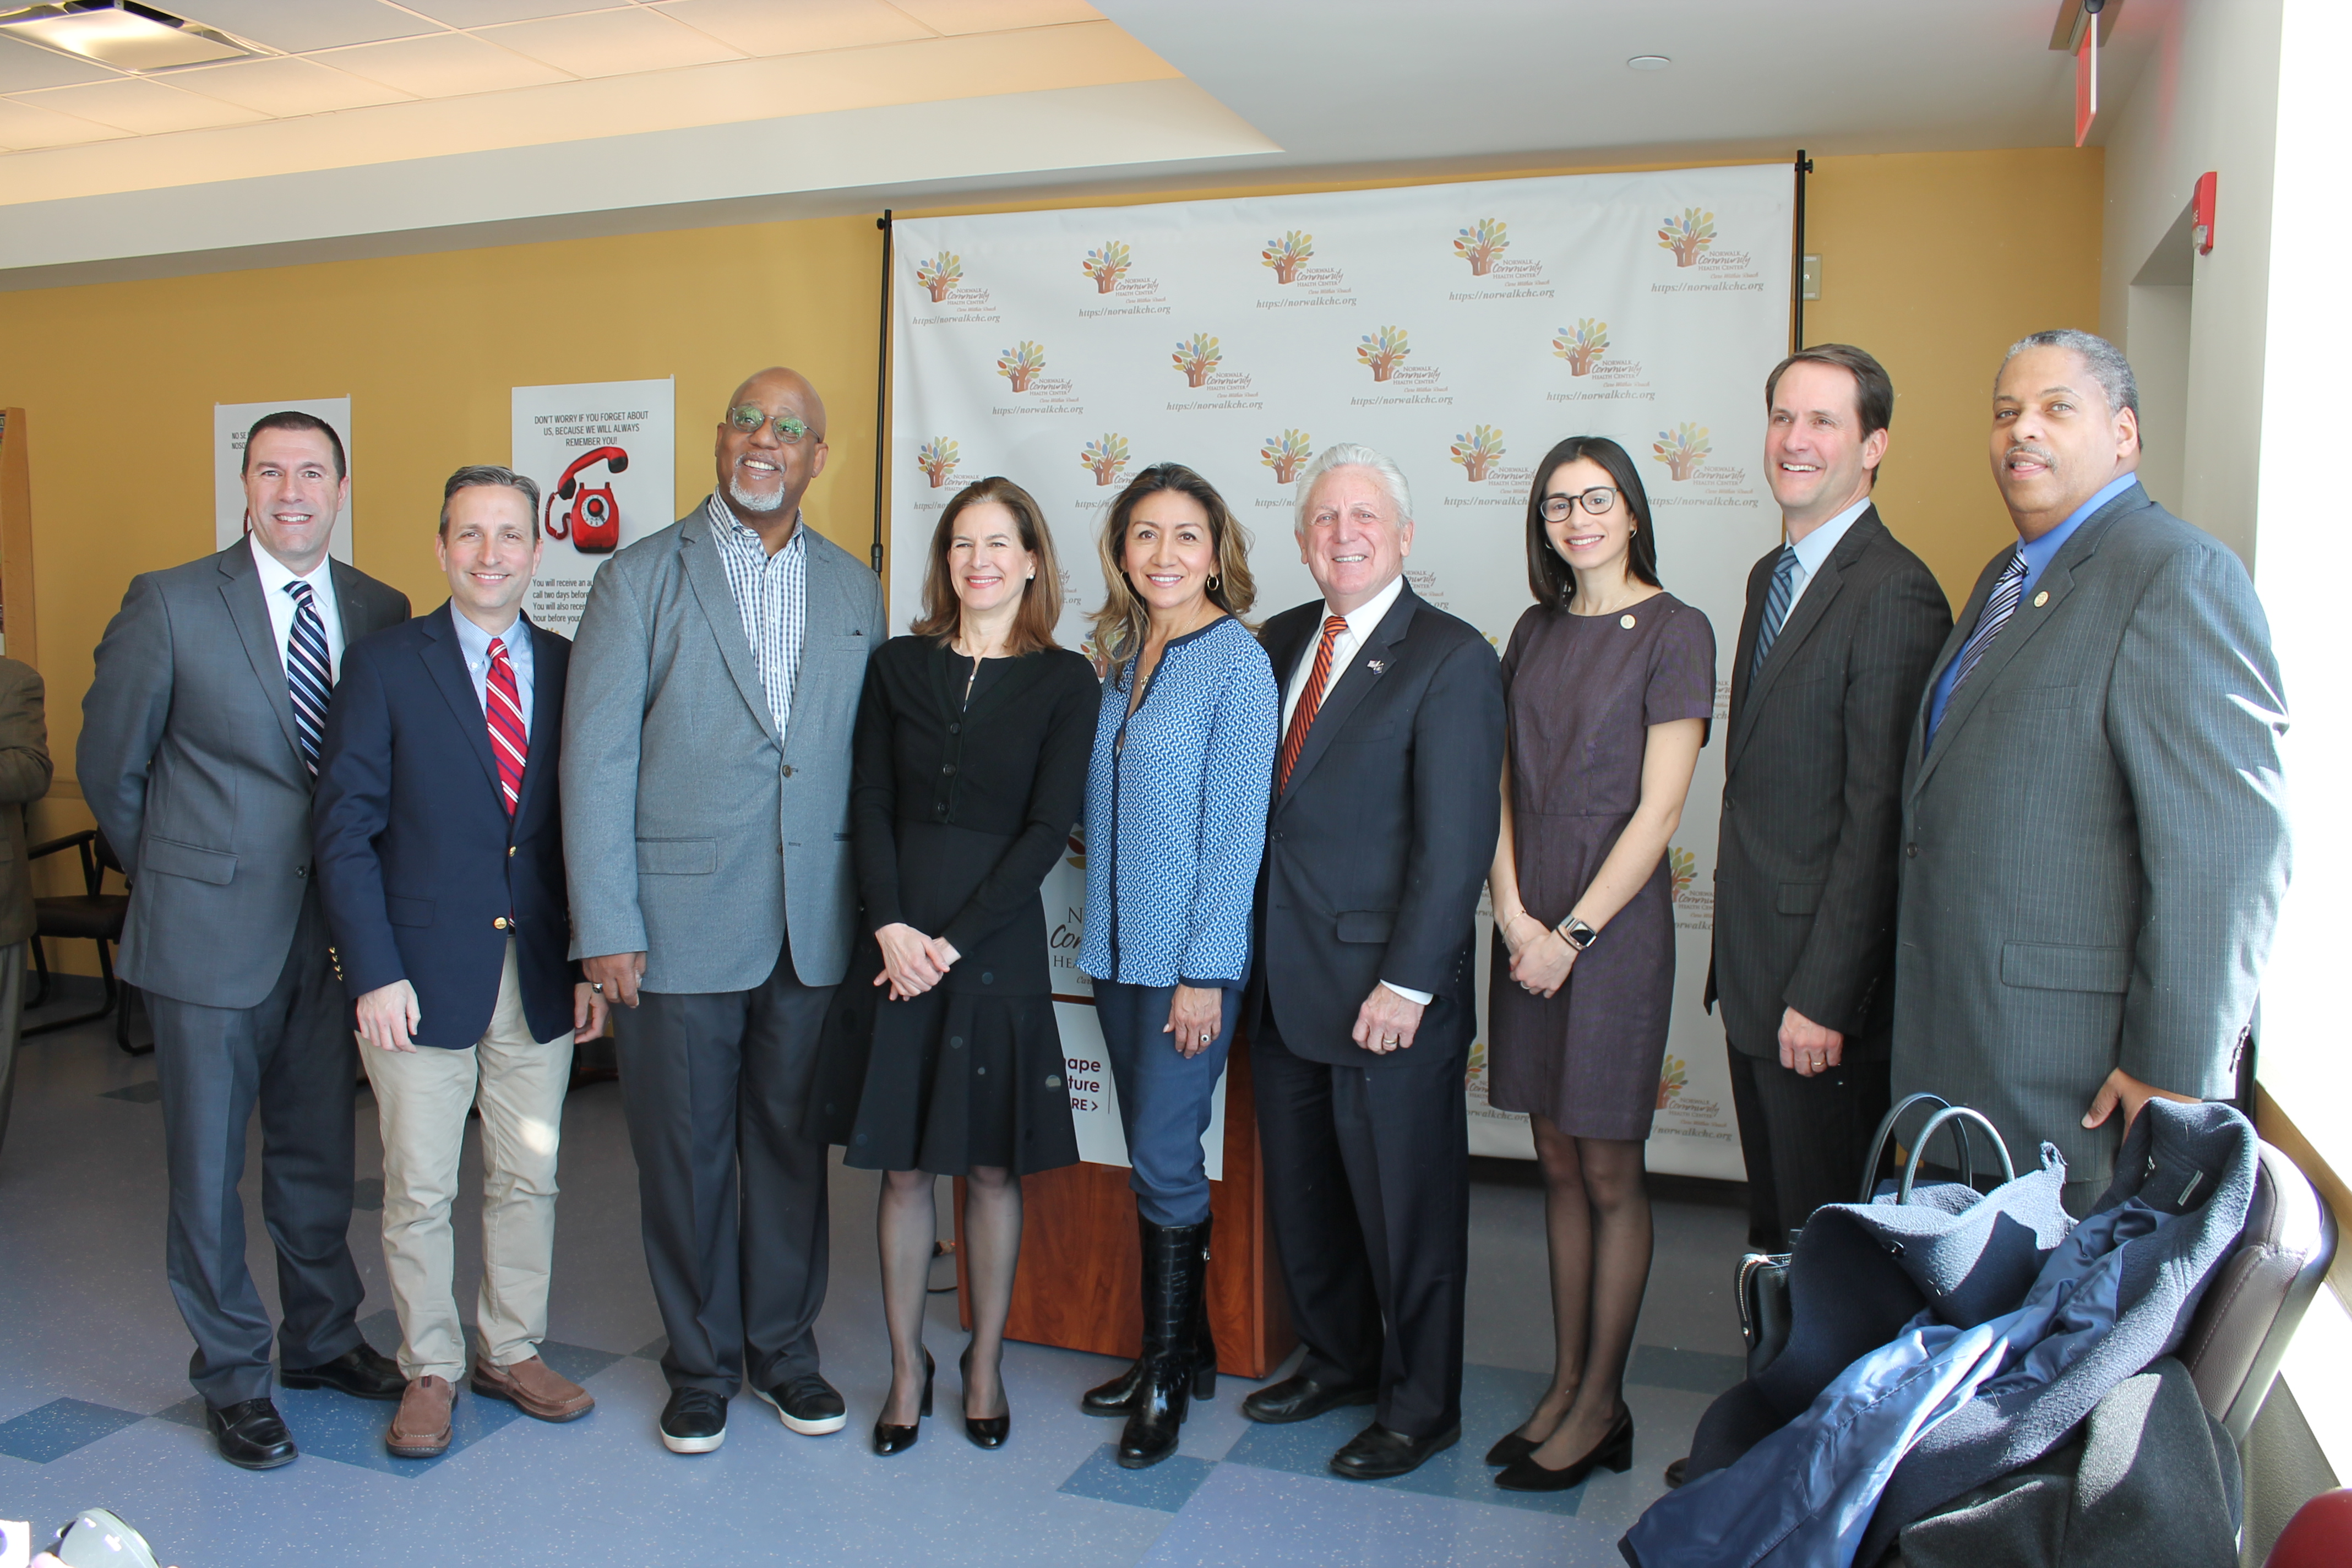 Lt. Governor Susan Bysiewicz today joined Congressman Jim Himes, Norwalk Mayor Harry Rilling, non-profit leaders, faith leaders, and other members of the Norwalk community at the Norwalk Community Health Center to kick off the city’s 2020 Census efforts.